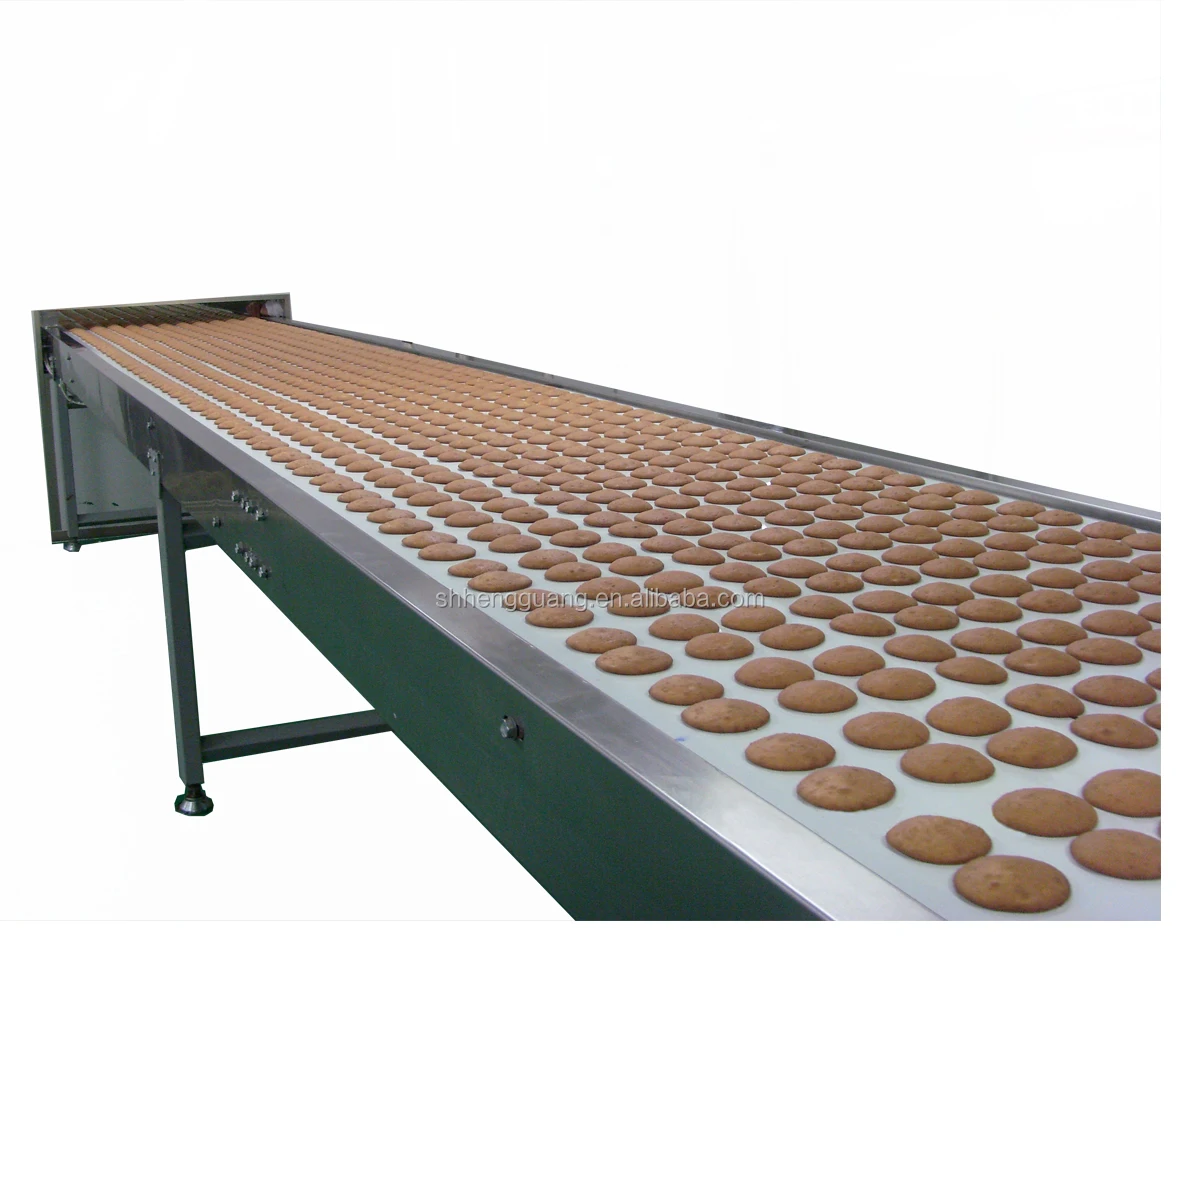 Full automatic complete sandwich pie bakery equipment in china